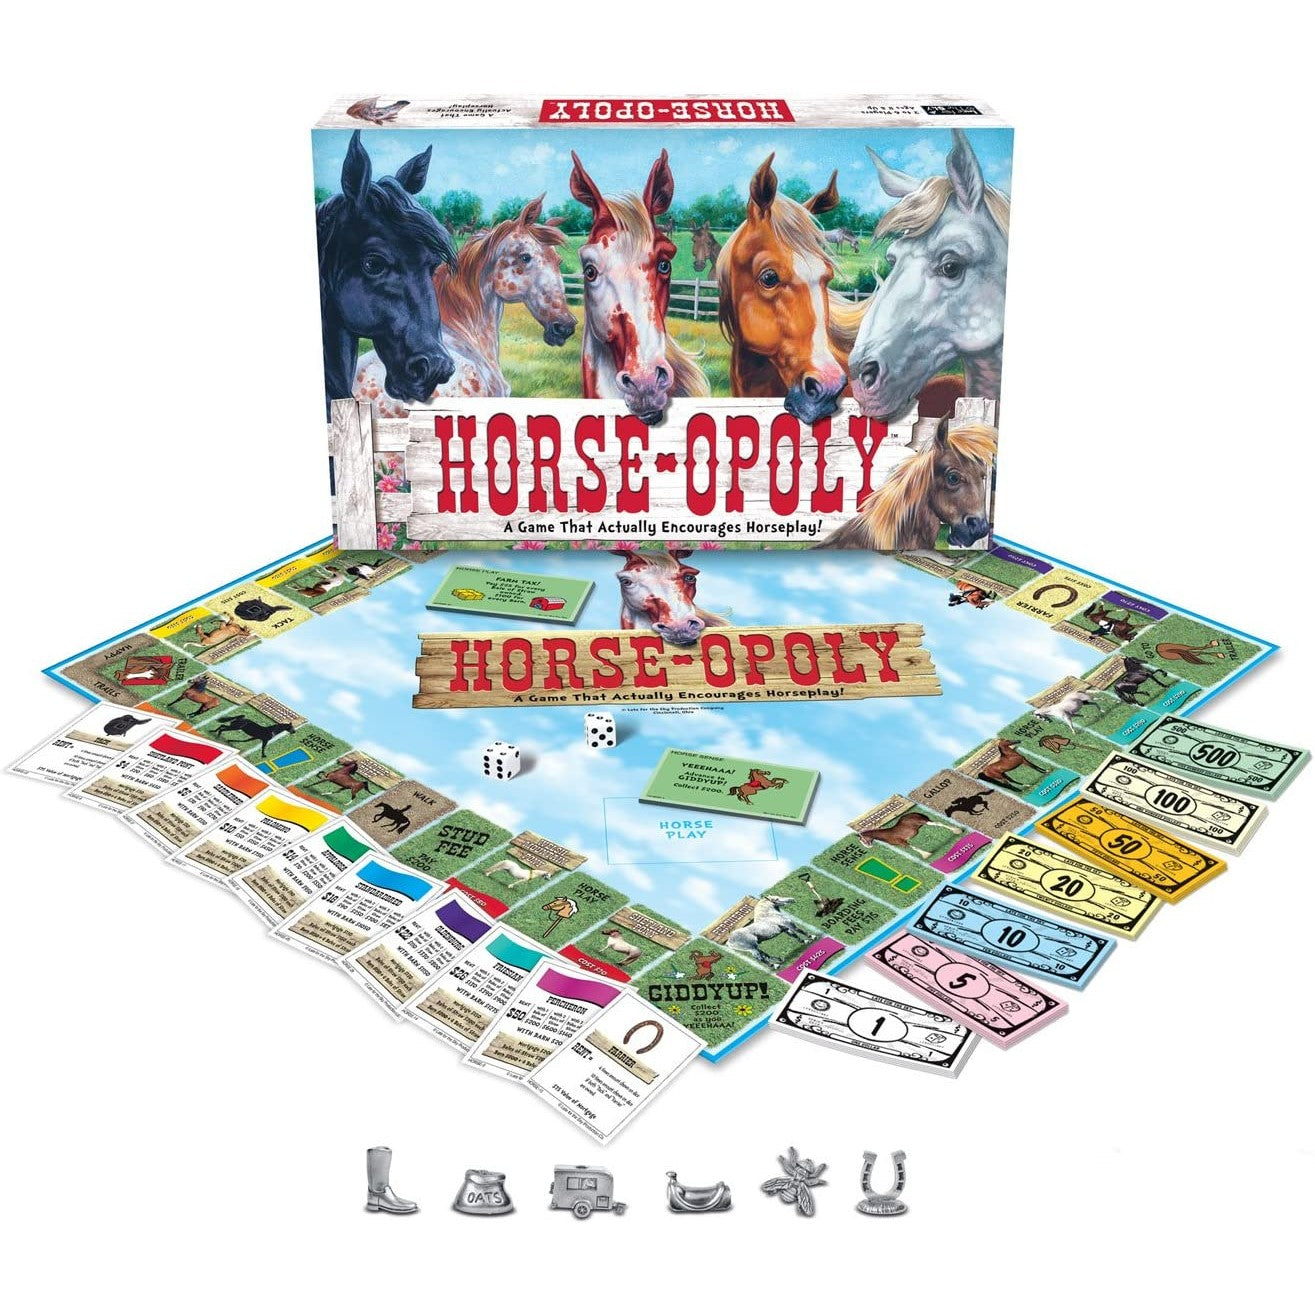 The inside contents of a board game called Horse-opoly along with the front of the box. The layout of the game is similar to Monopoly except with a horse theme.